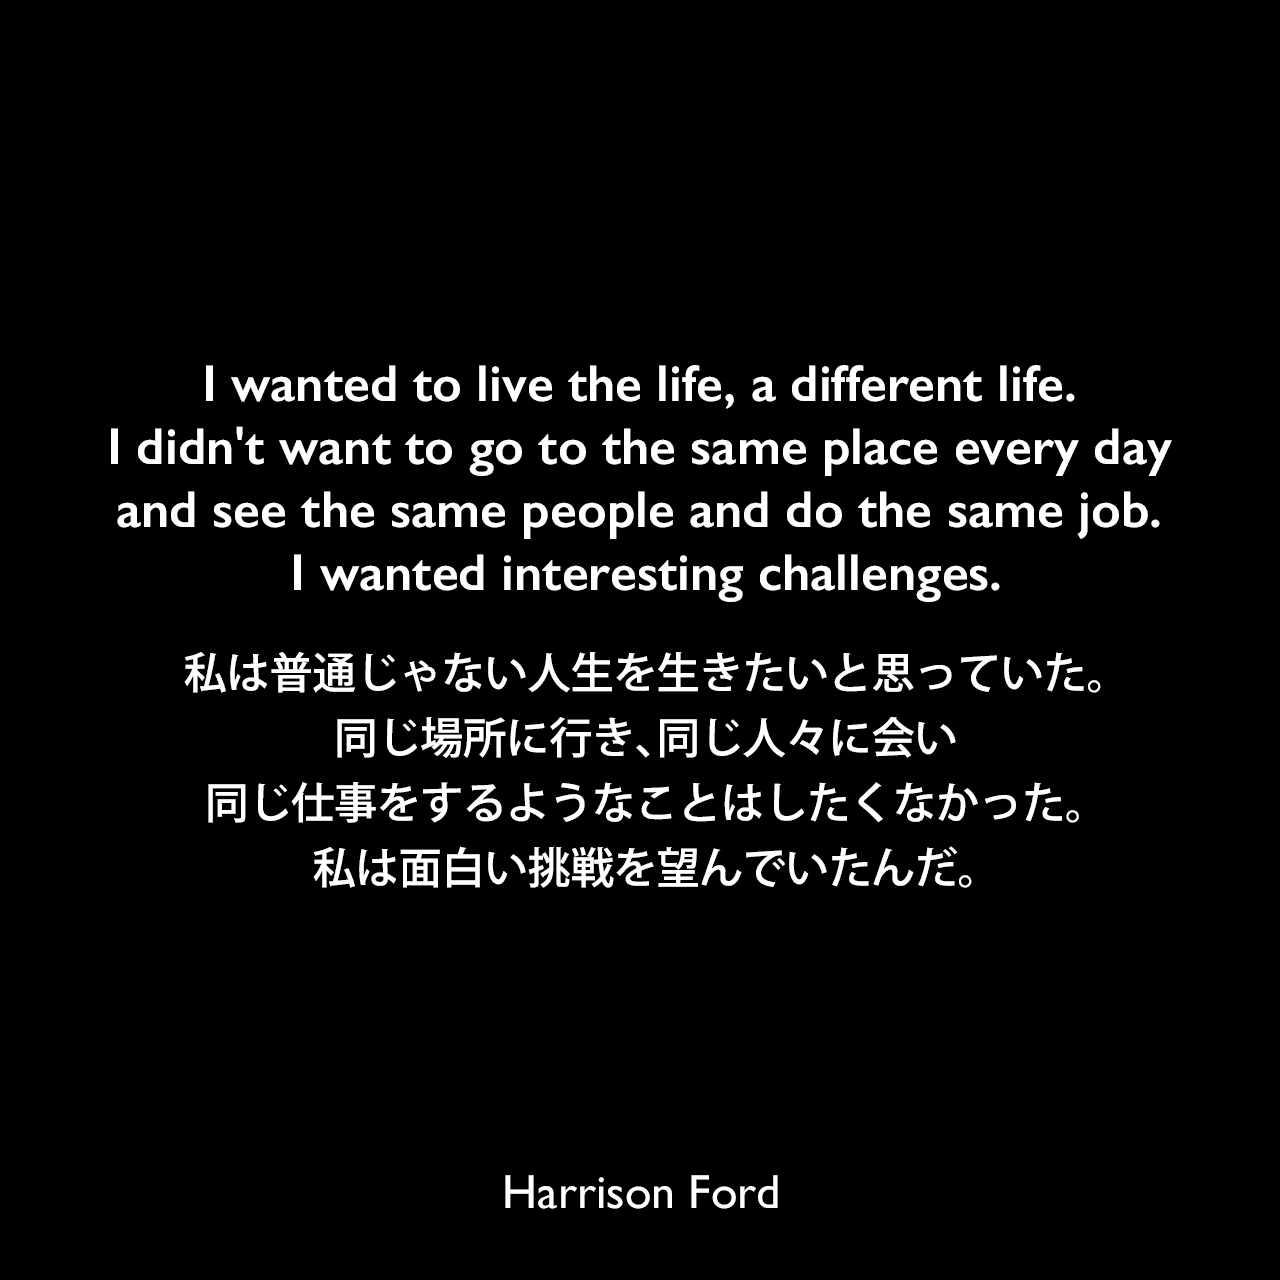 I wanted to live the life, a different life. I didn't want to go to the same place every day and see the same people and do the same job. I wanted interesting challenges.私は普通じゃない人生を生きたいと思っていた。同じ場所に行き、同じ人々に会い、同じ仕事をするようなことはしたくなかった。私は面白い挑戦を望んでいたんだ。Harrison Ford